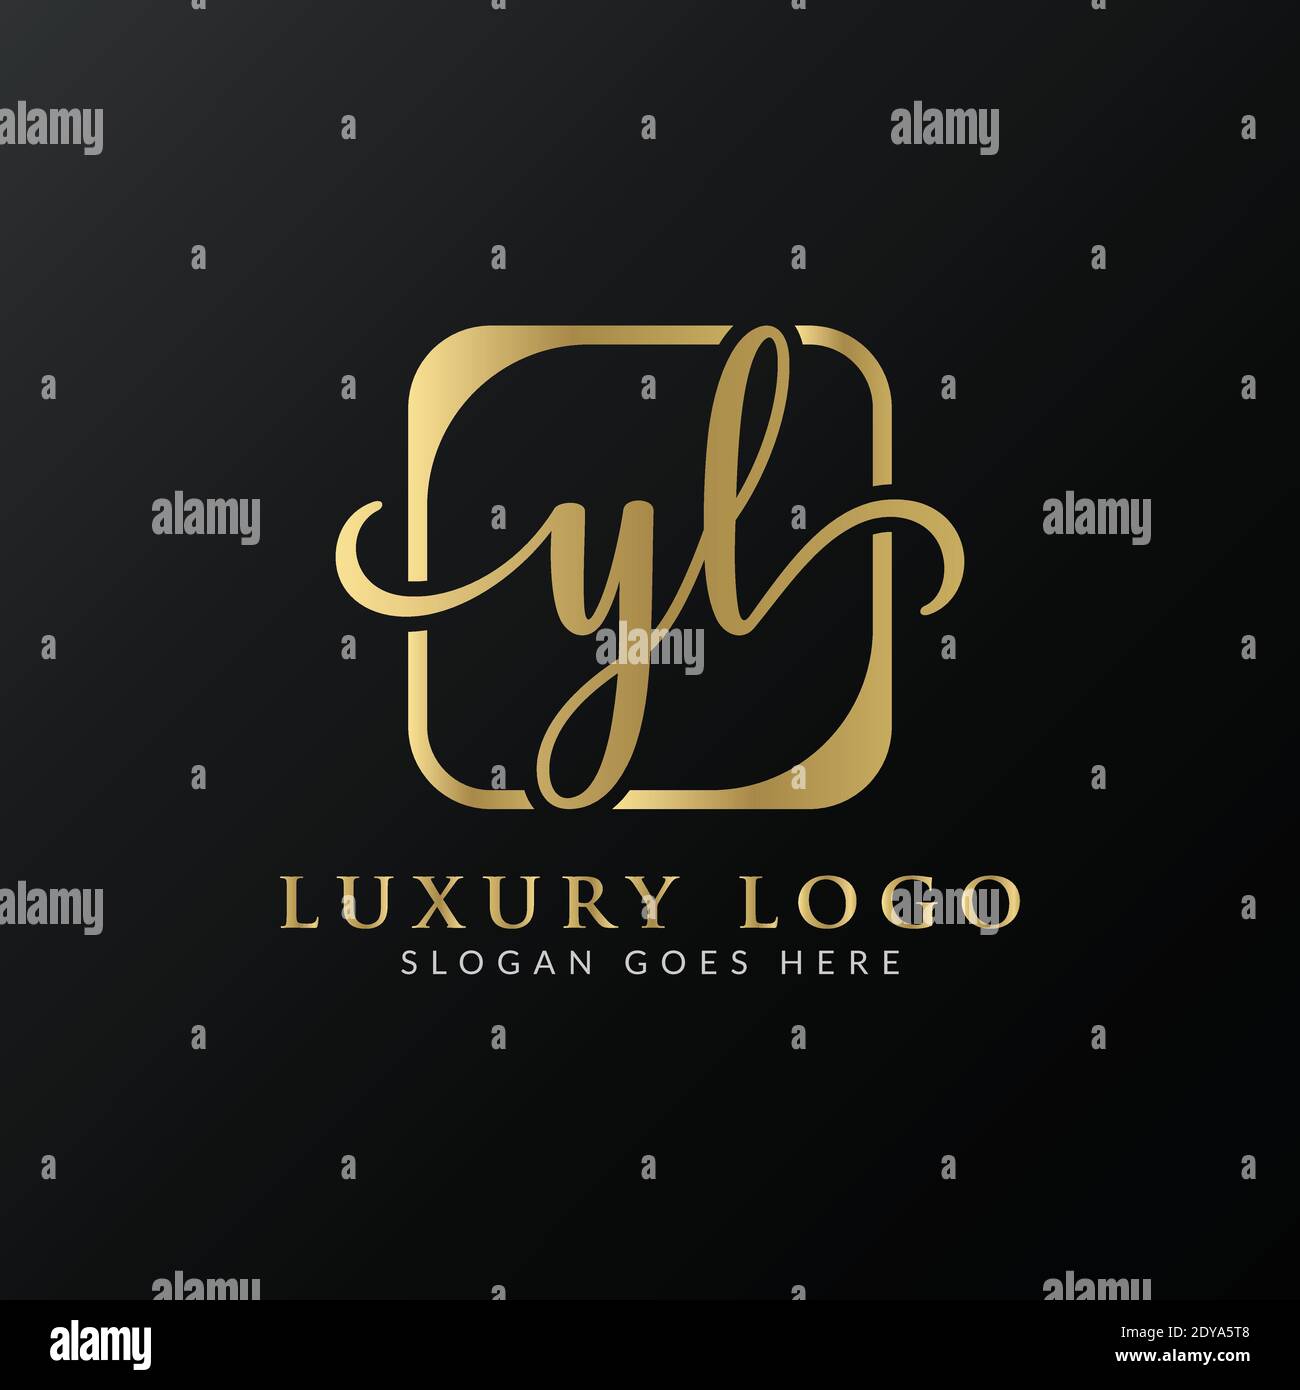 Modern yl logo design for business and company Vector Image